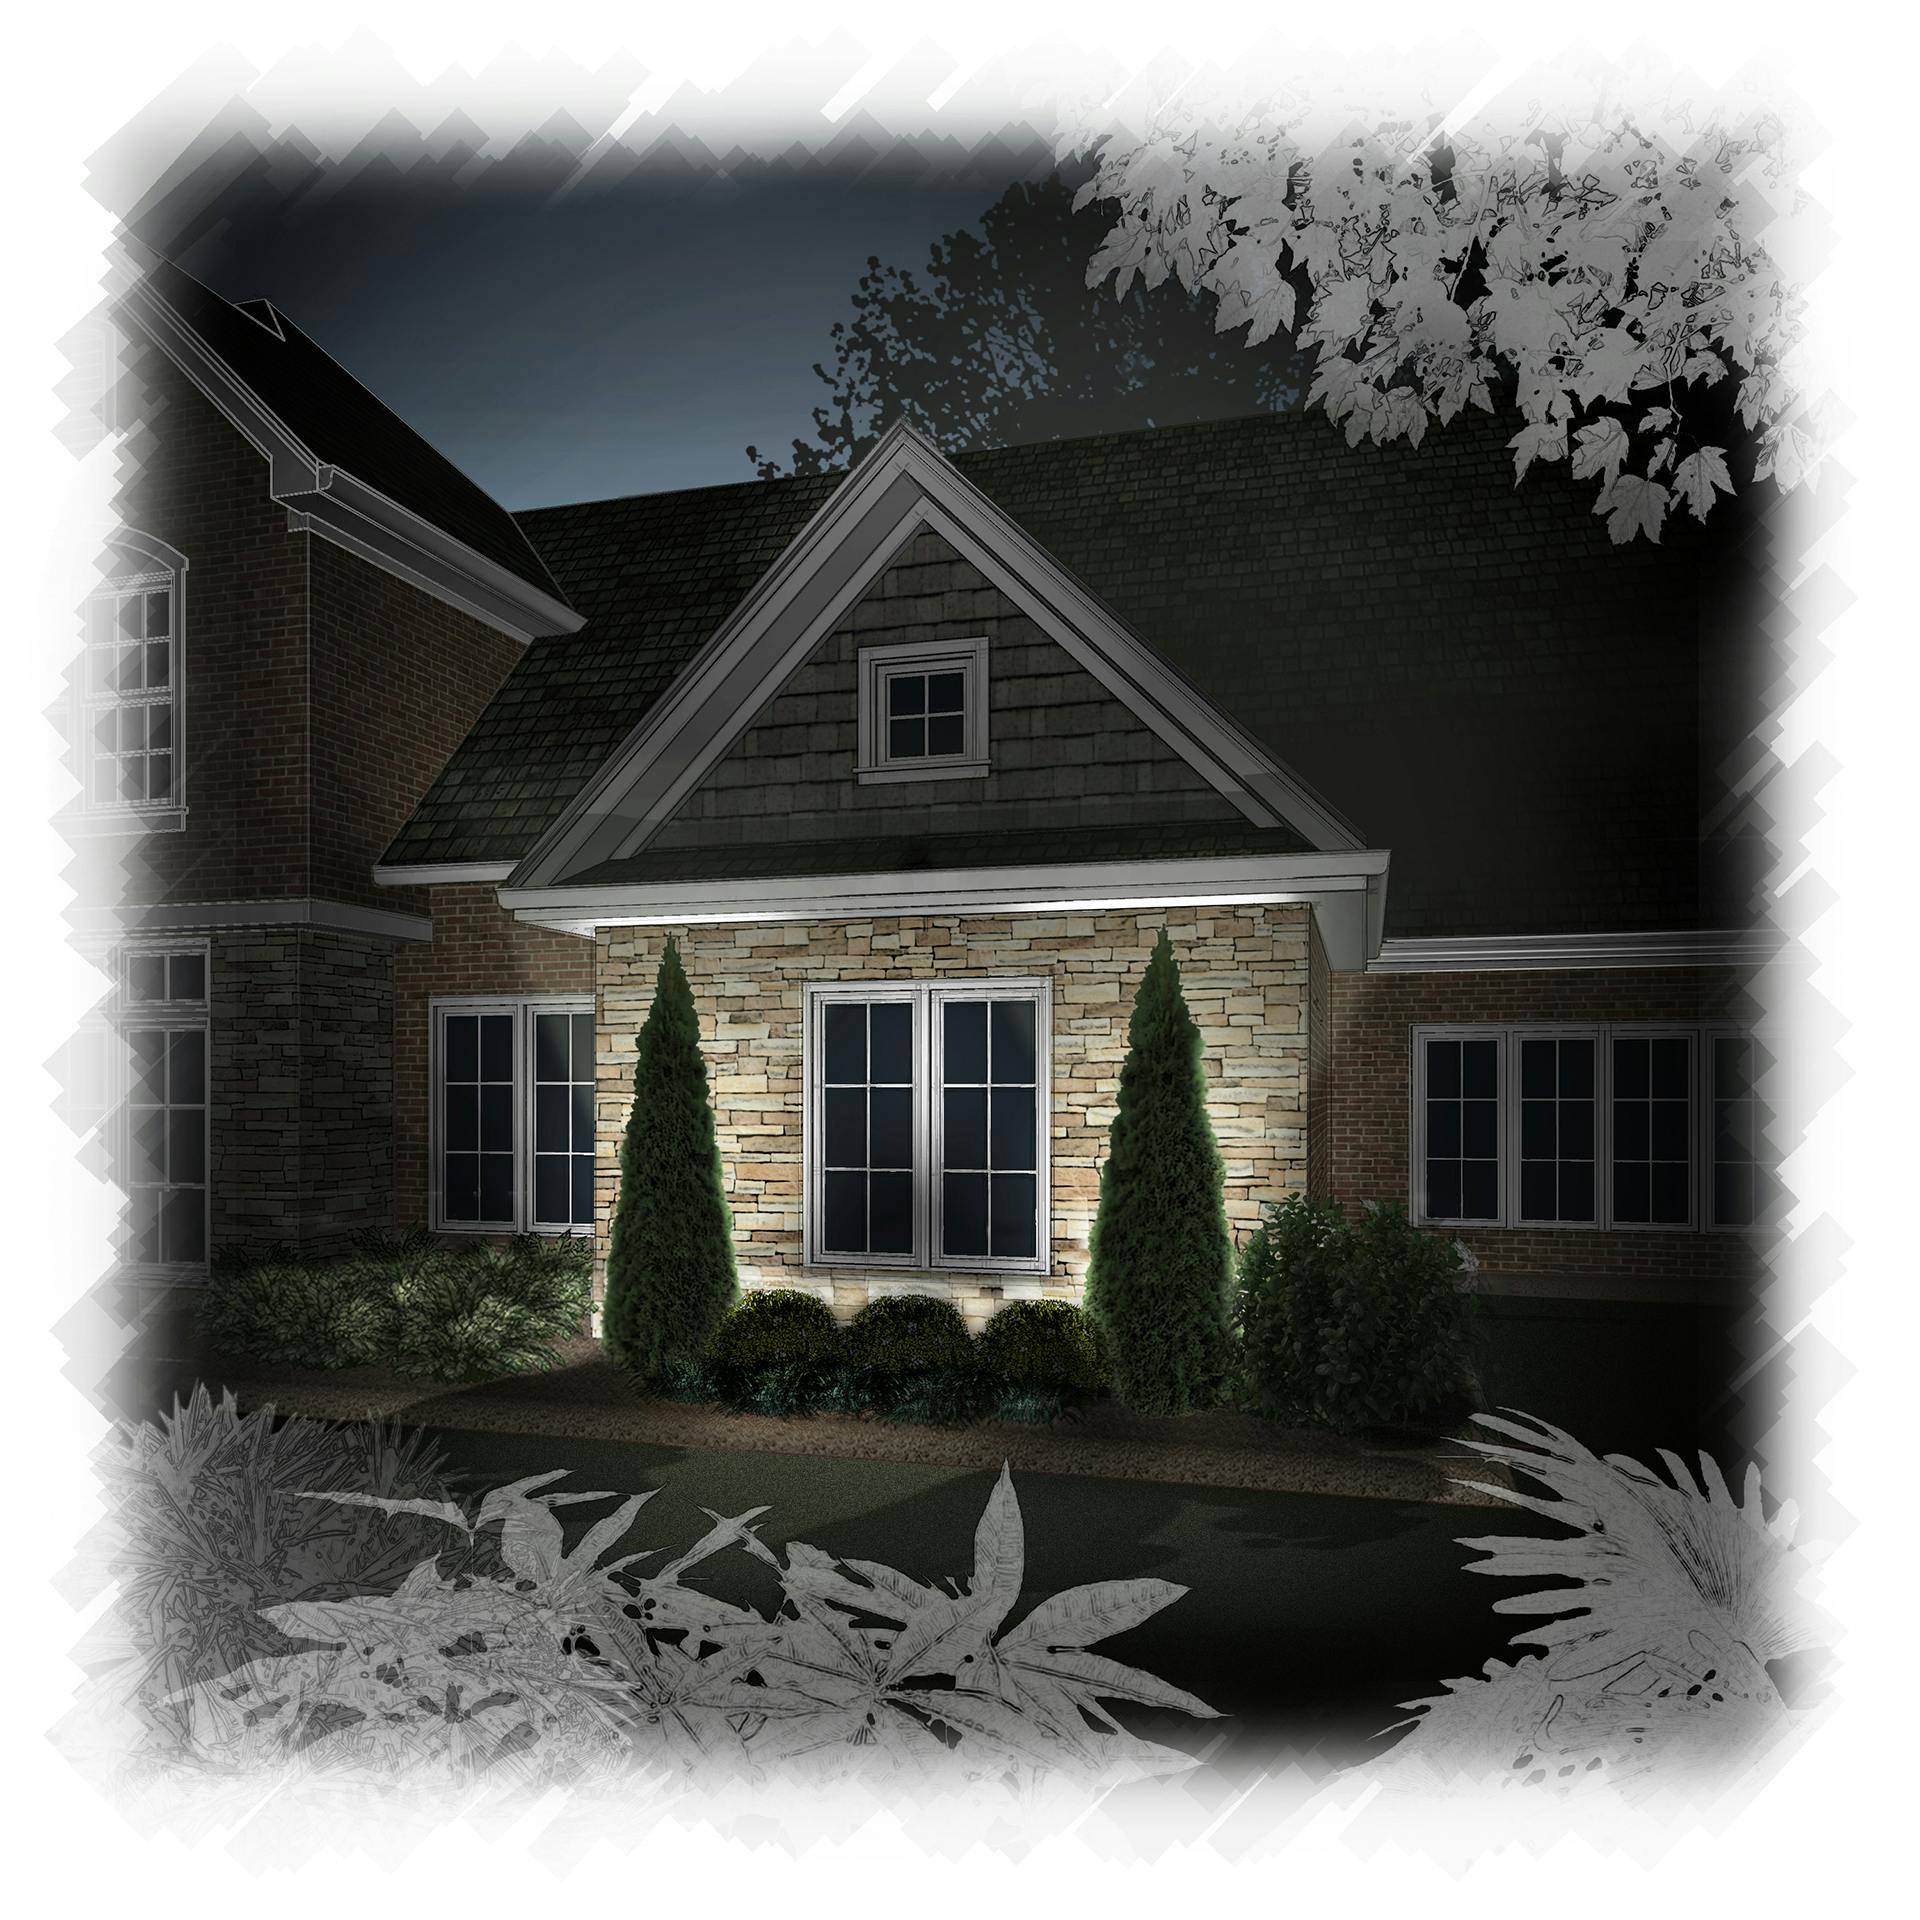 Illustration of an exterior of a home with lights behind tall shrubs, aiming directly at the wall of the home